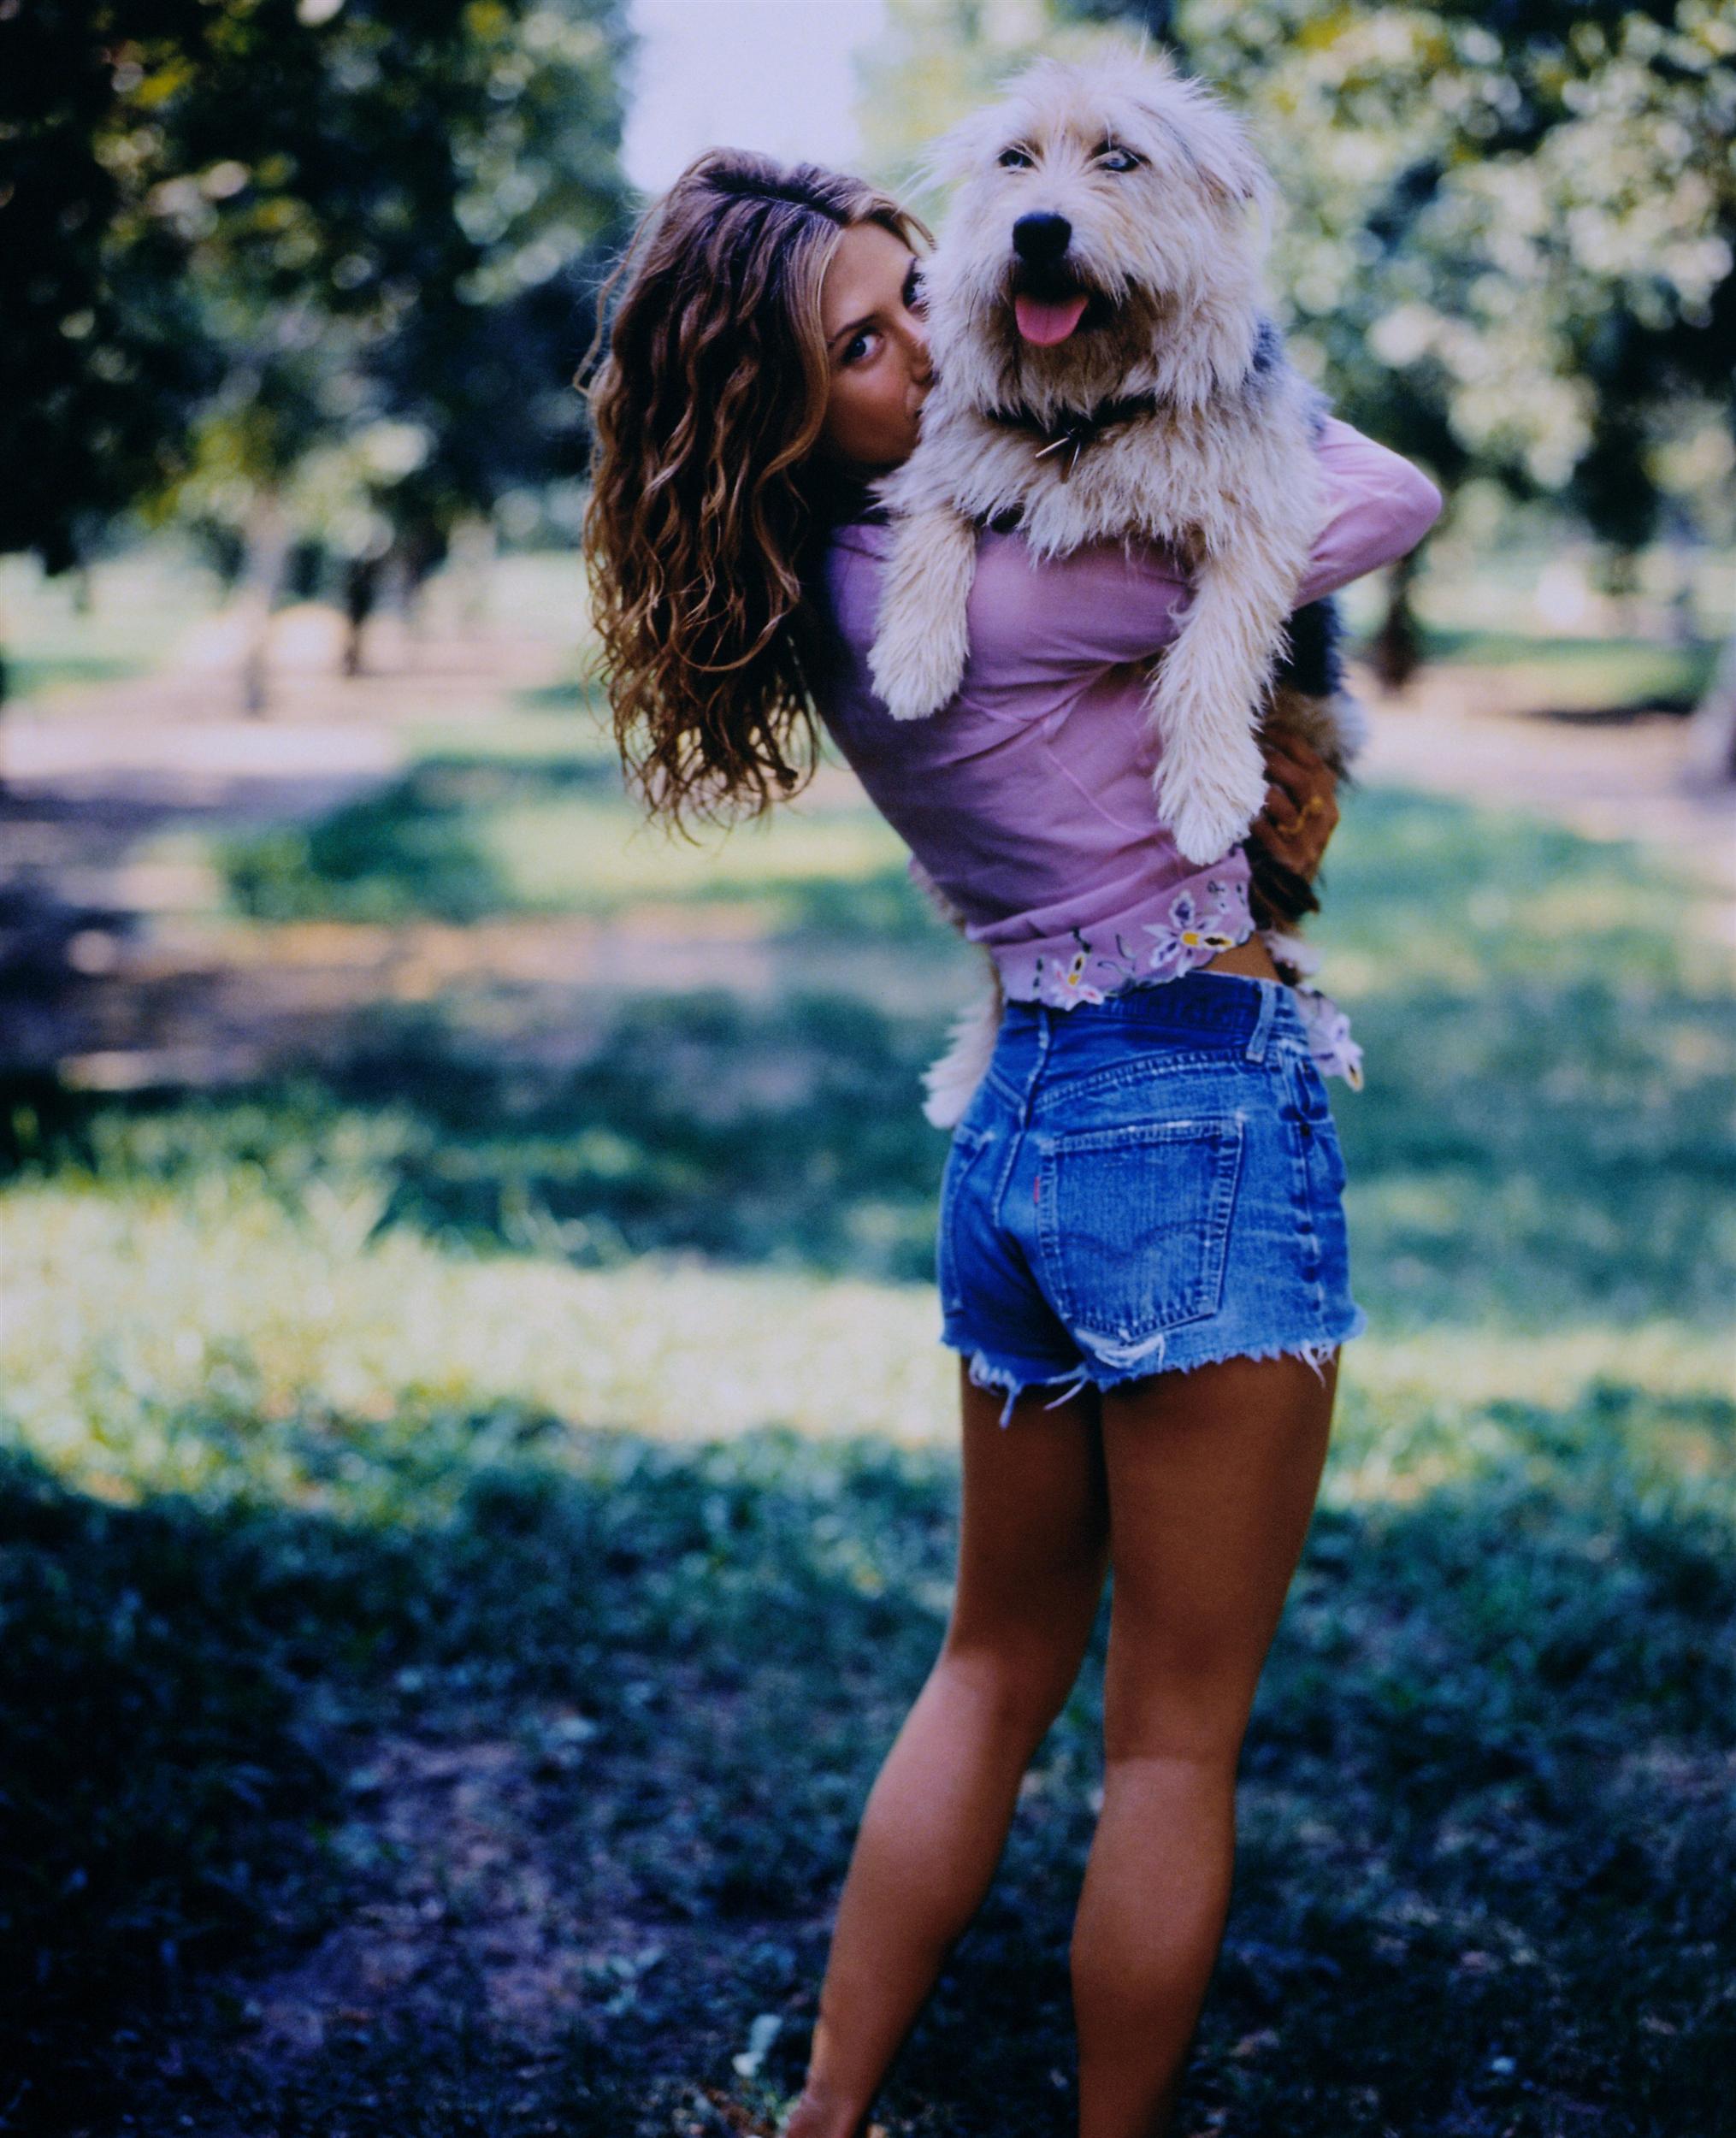 Jennifer Aniston in the orchard carrying her Labradoodle